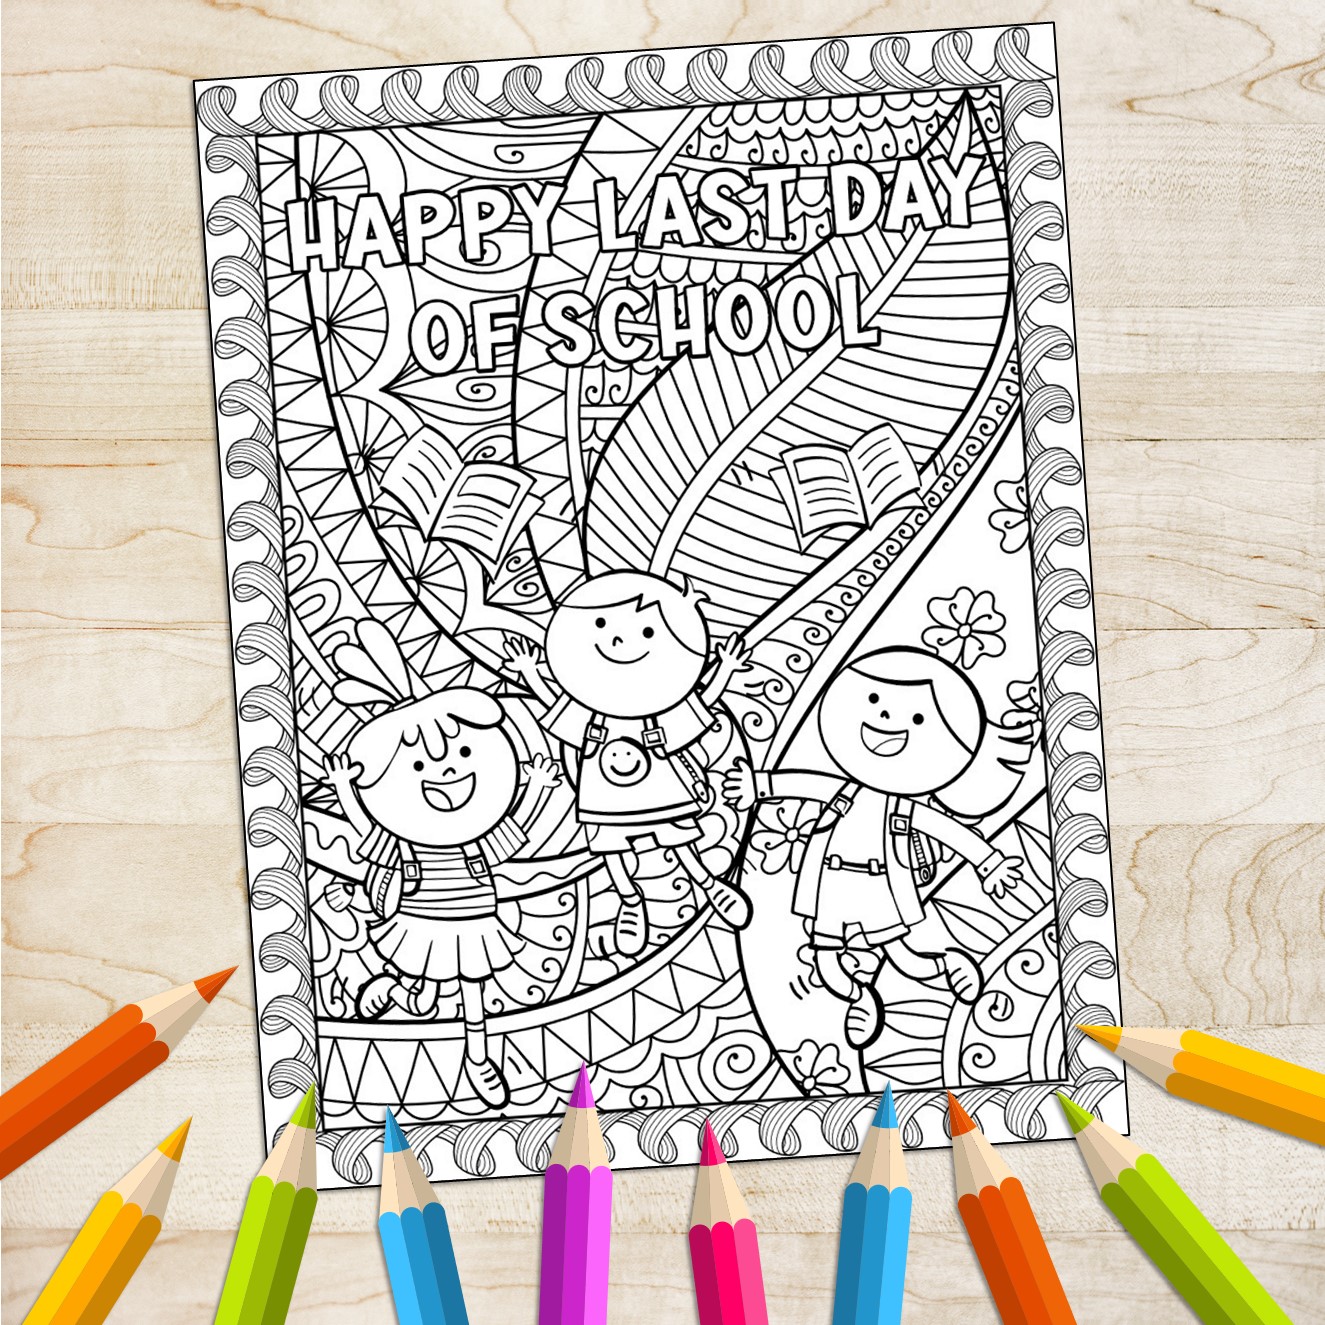 Last days of school countdown activities word search mindfulness coloring page made by teachers